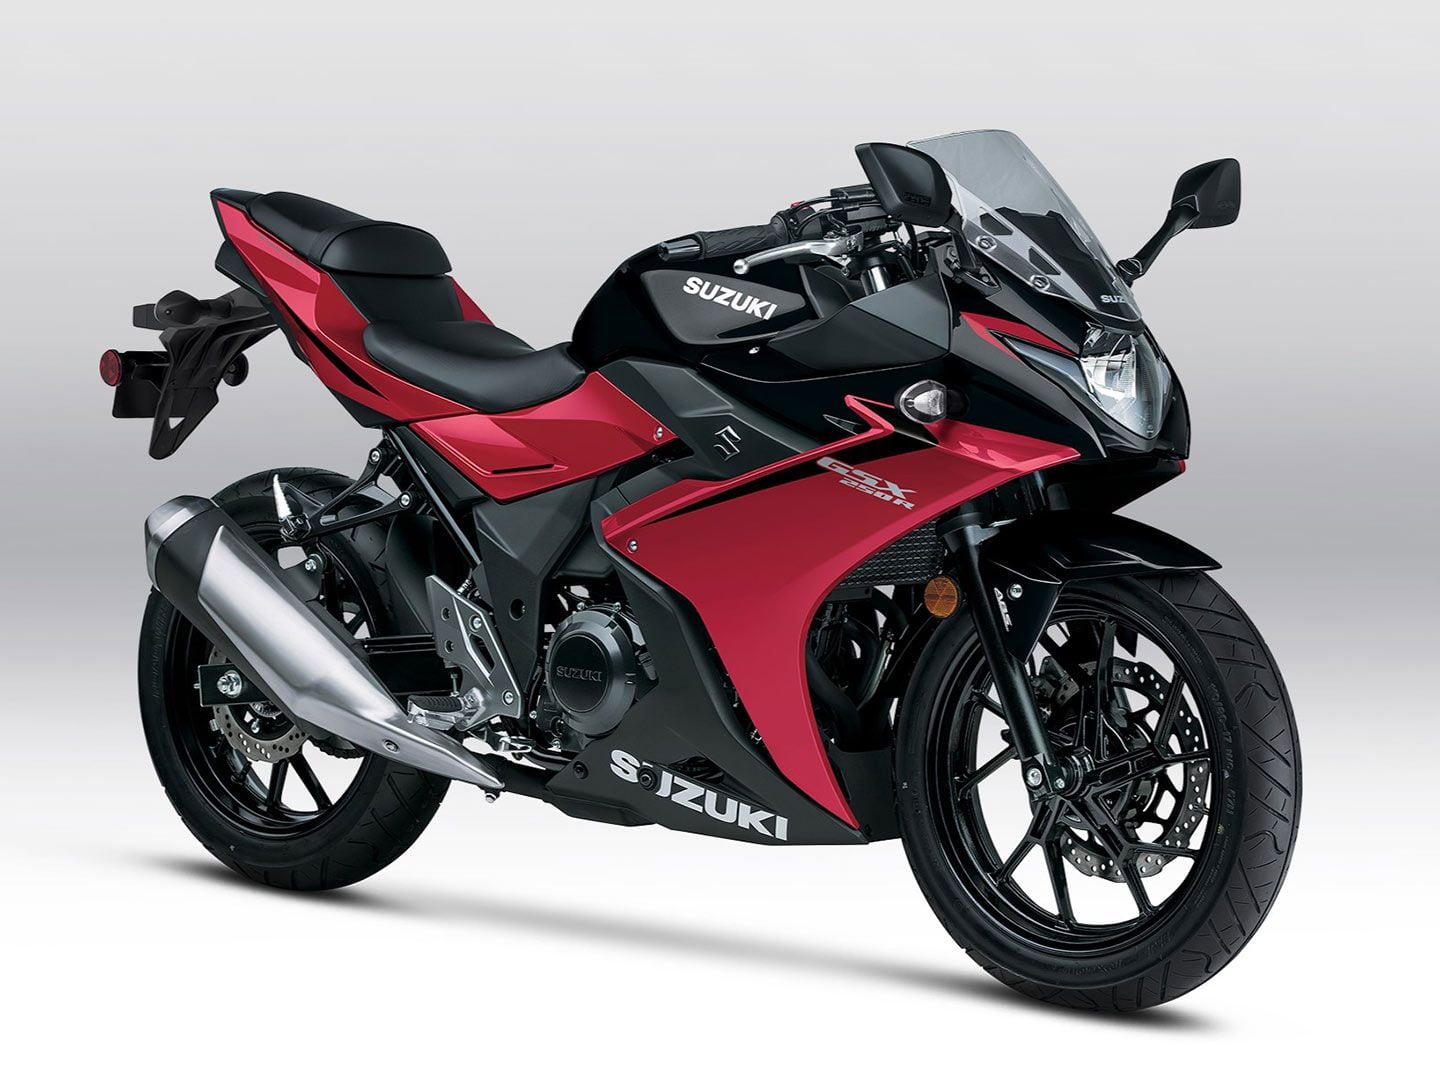 For burgeoning trackday beginners and small-bore sportbike buffs alike, it's hard to go wrong with Suzuki’s GSX250R.